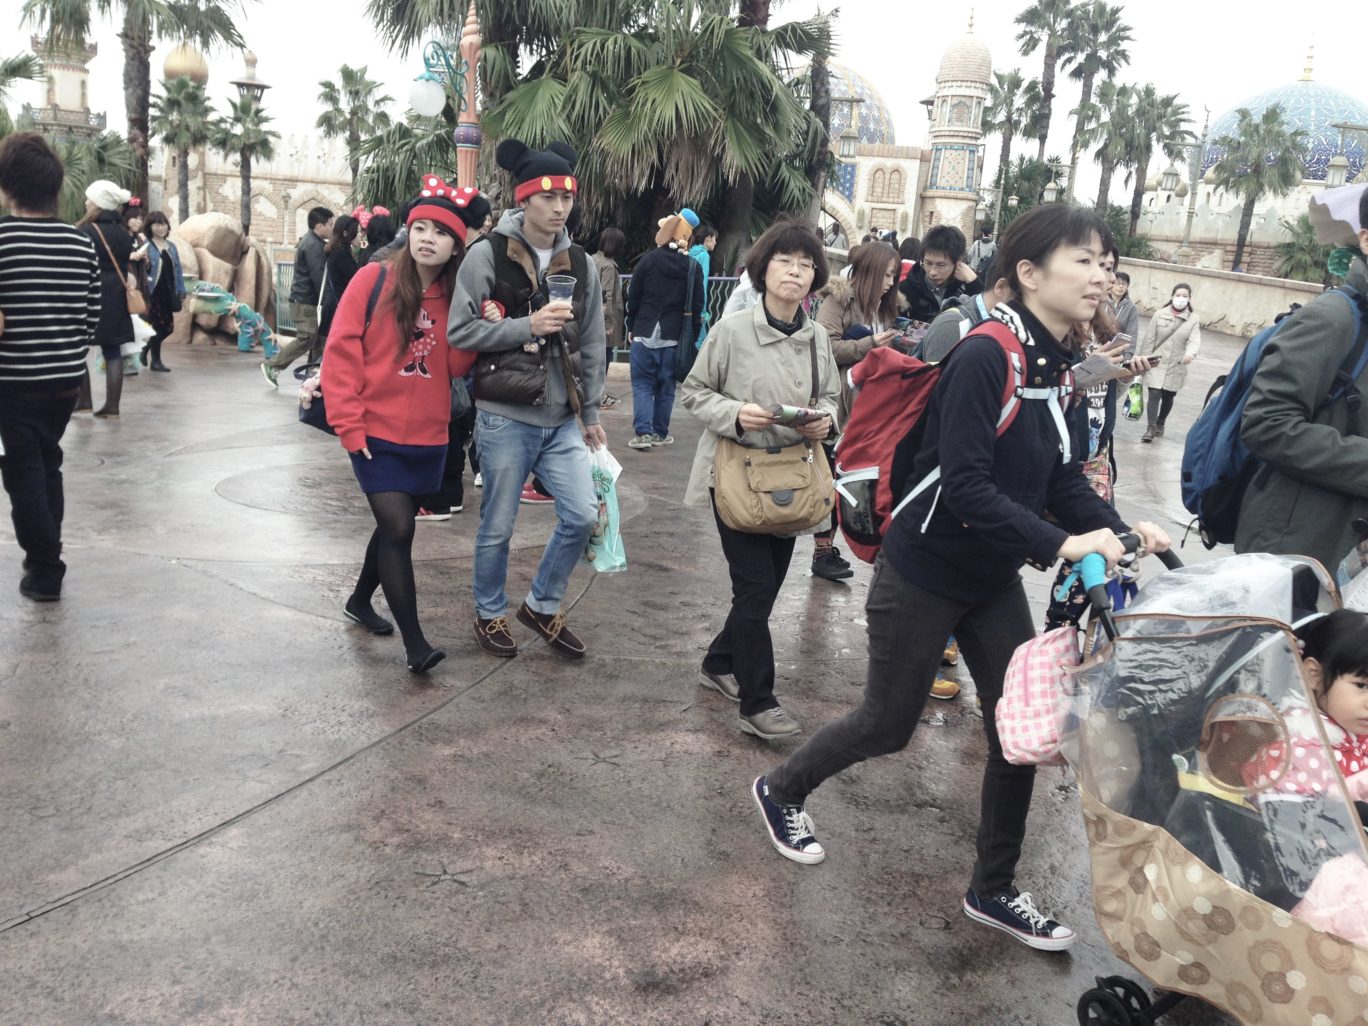 Kawaii Tokyo Disney Sea Tokyo Disney Sea Tokyo Disneyland Matching Outfits Tokyo, Japan Cute 7